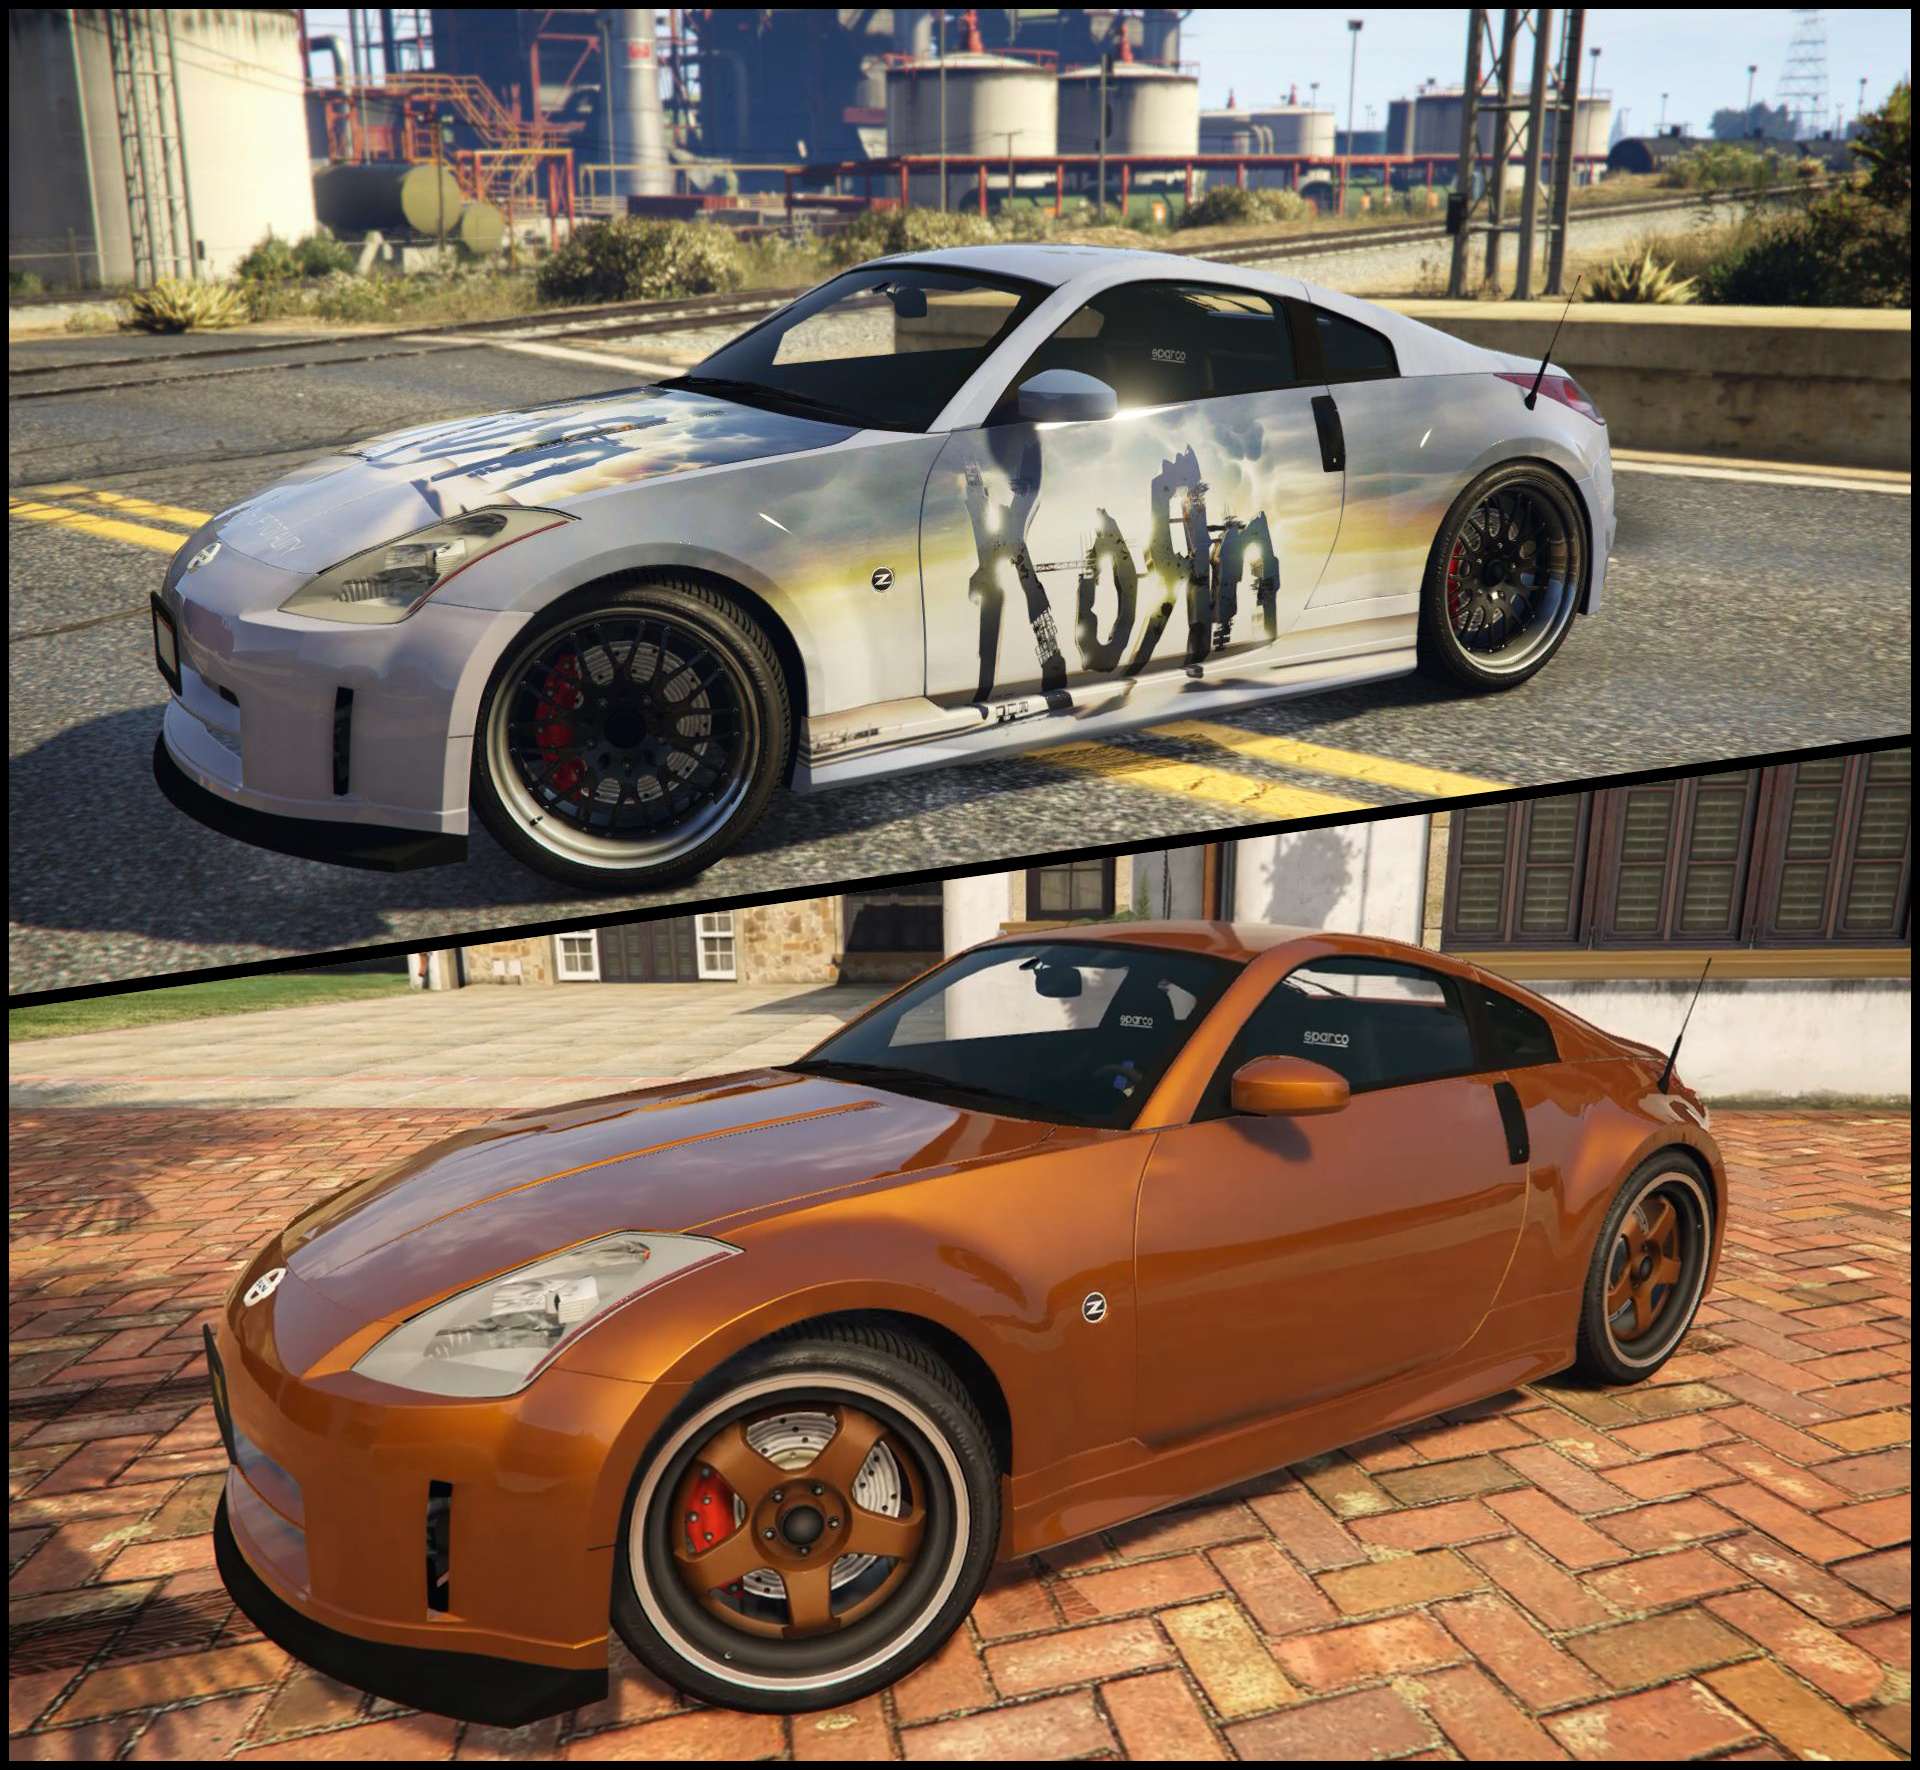 Nissan 350z (Clean & with Livery) .